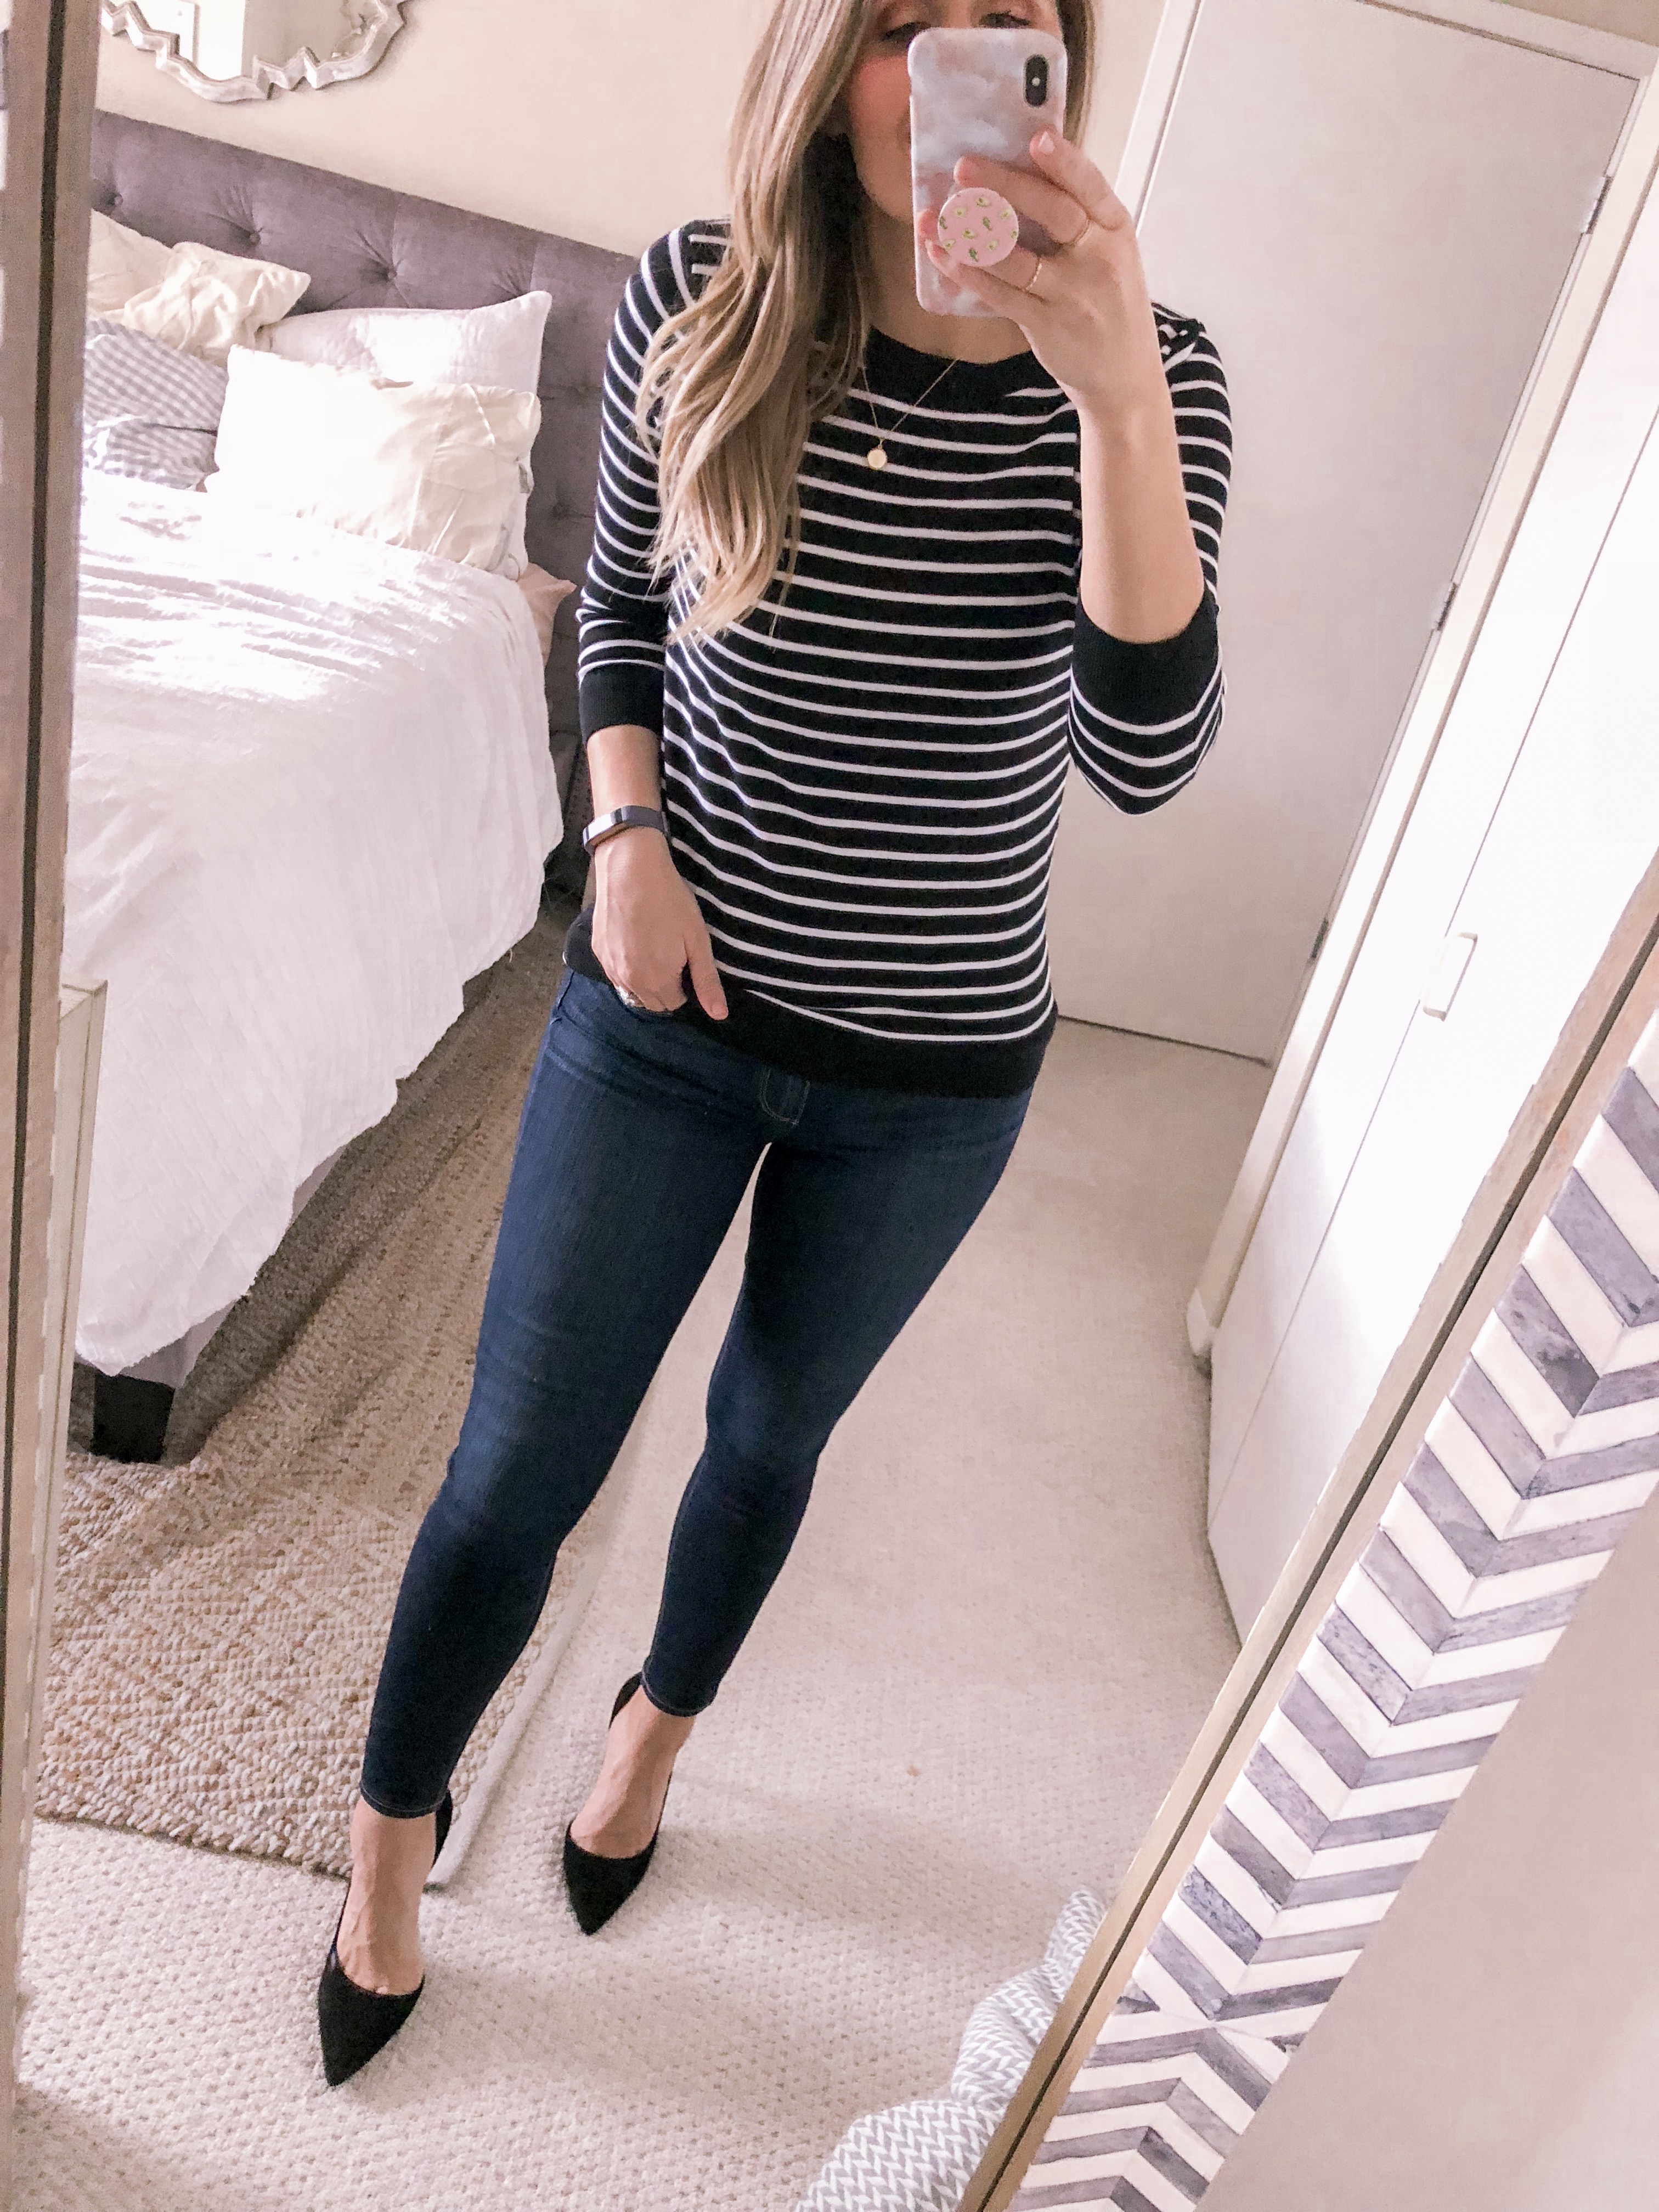 Chicago fashion blogger Visions of Vogue styles a black striped sweater with black suede heels for a dressy business casual outfit idea.